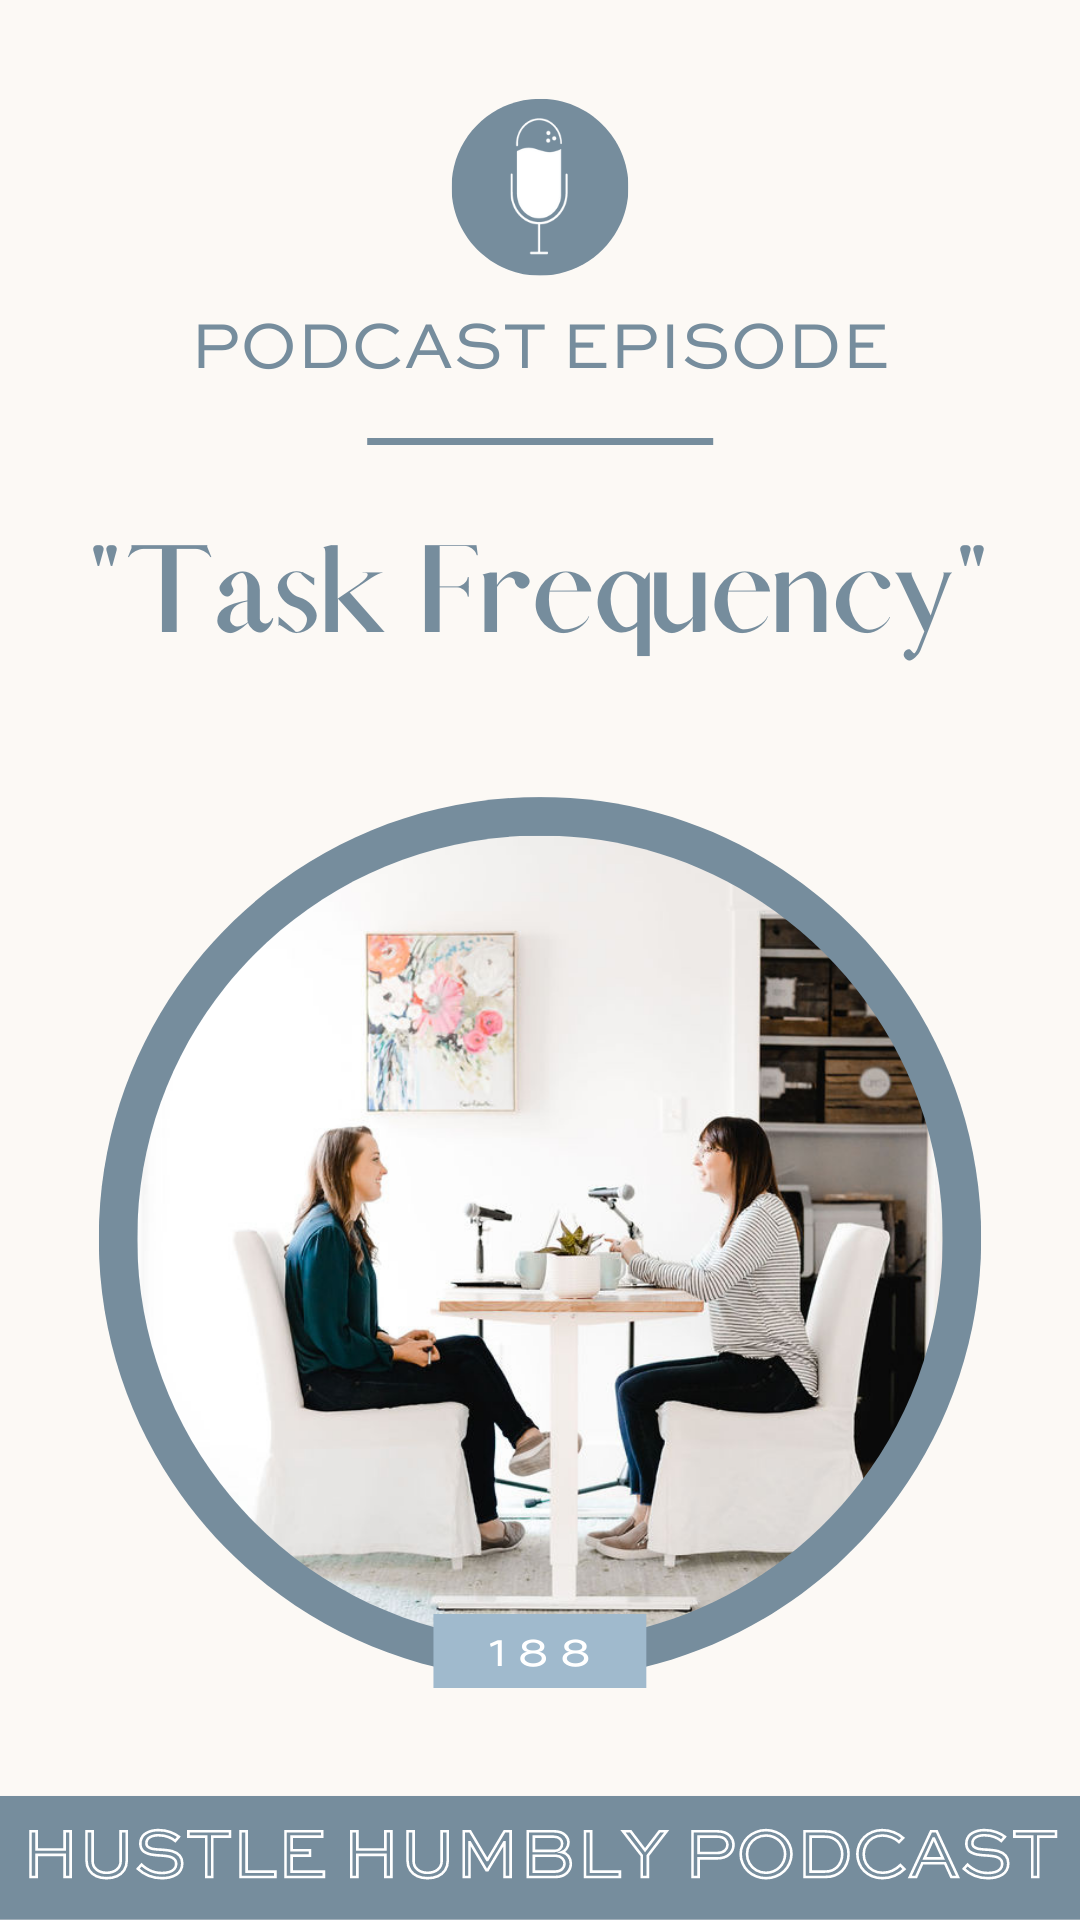 Hustle Humbly Podcast Episode 188: Task Frequency/What To Do and When To Do It